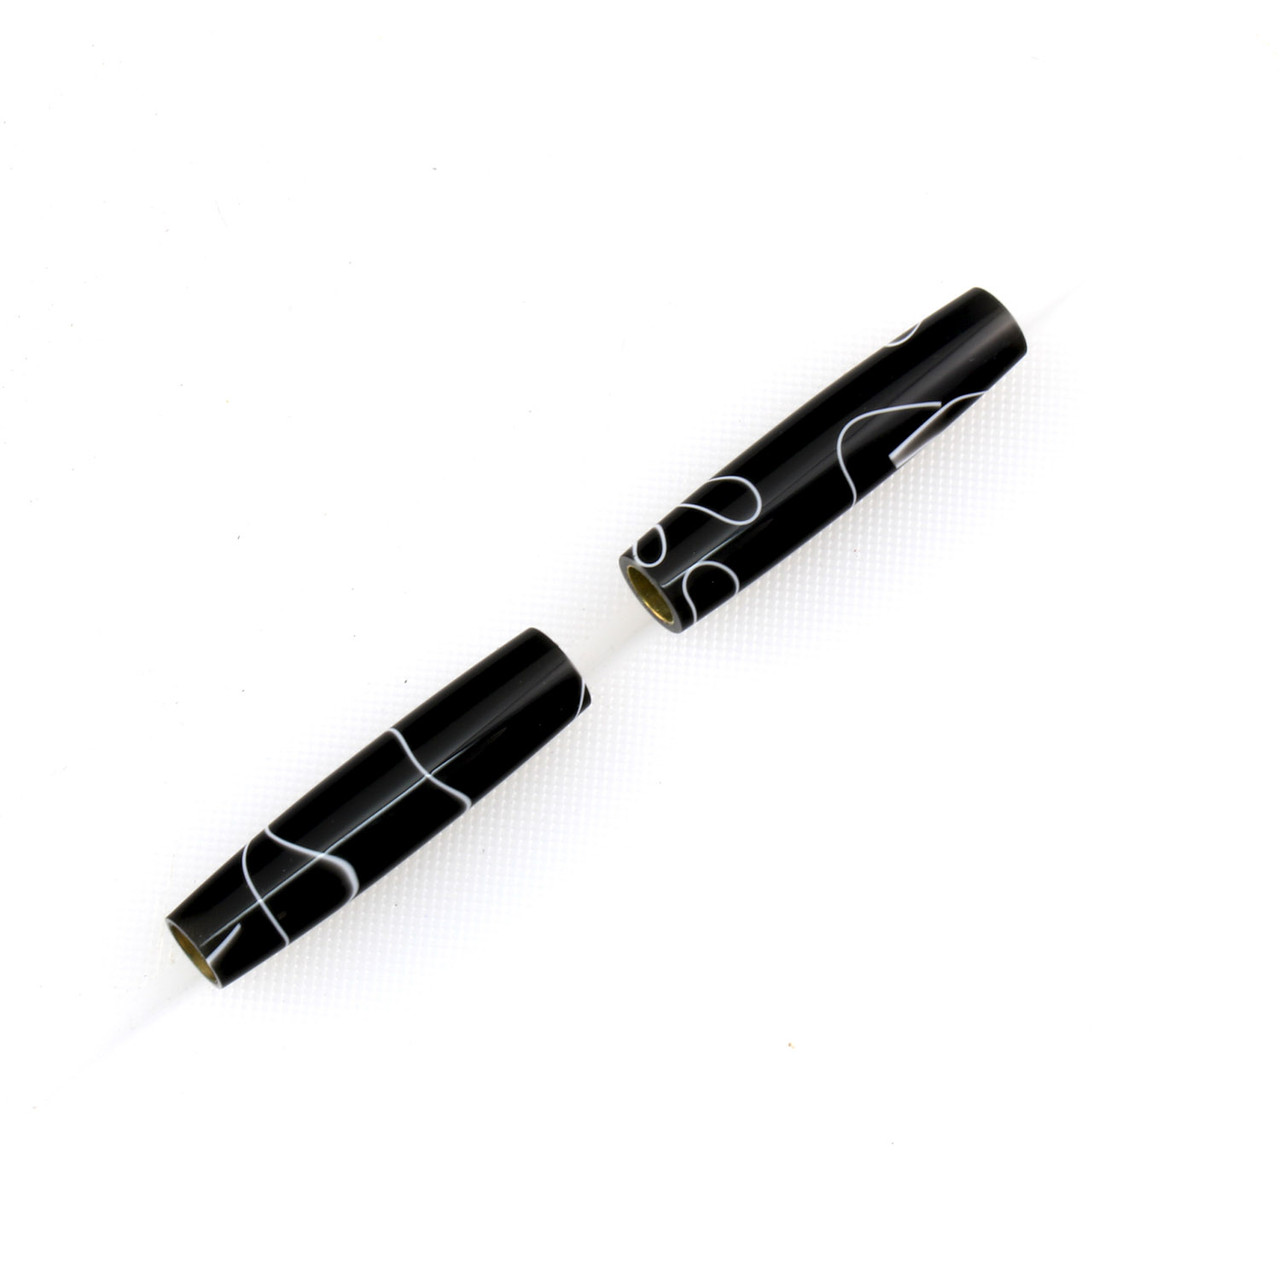 Legacy, Finished Pen Blank for Power Pen Kits, Black with White Lines